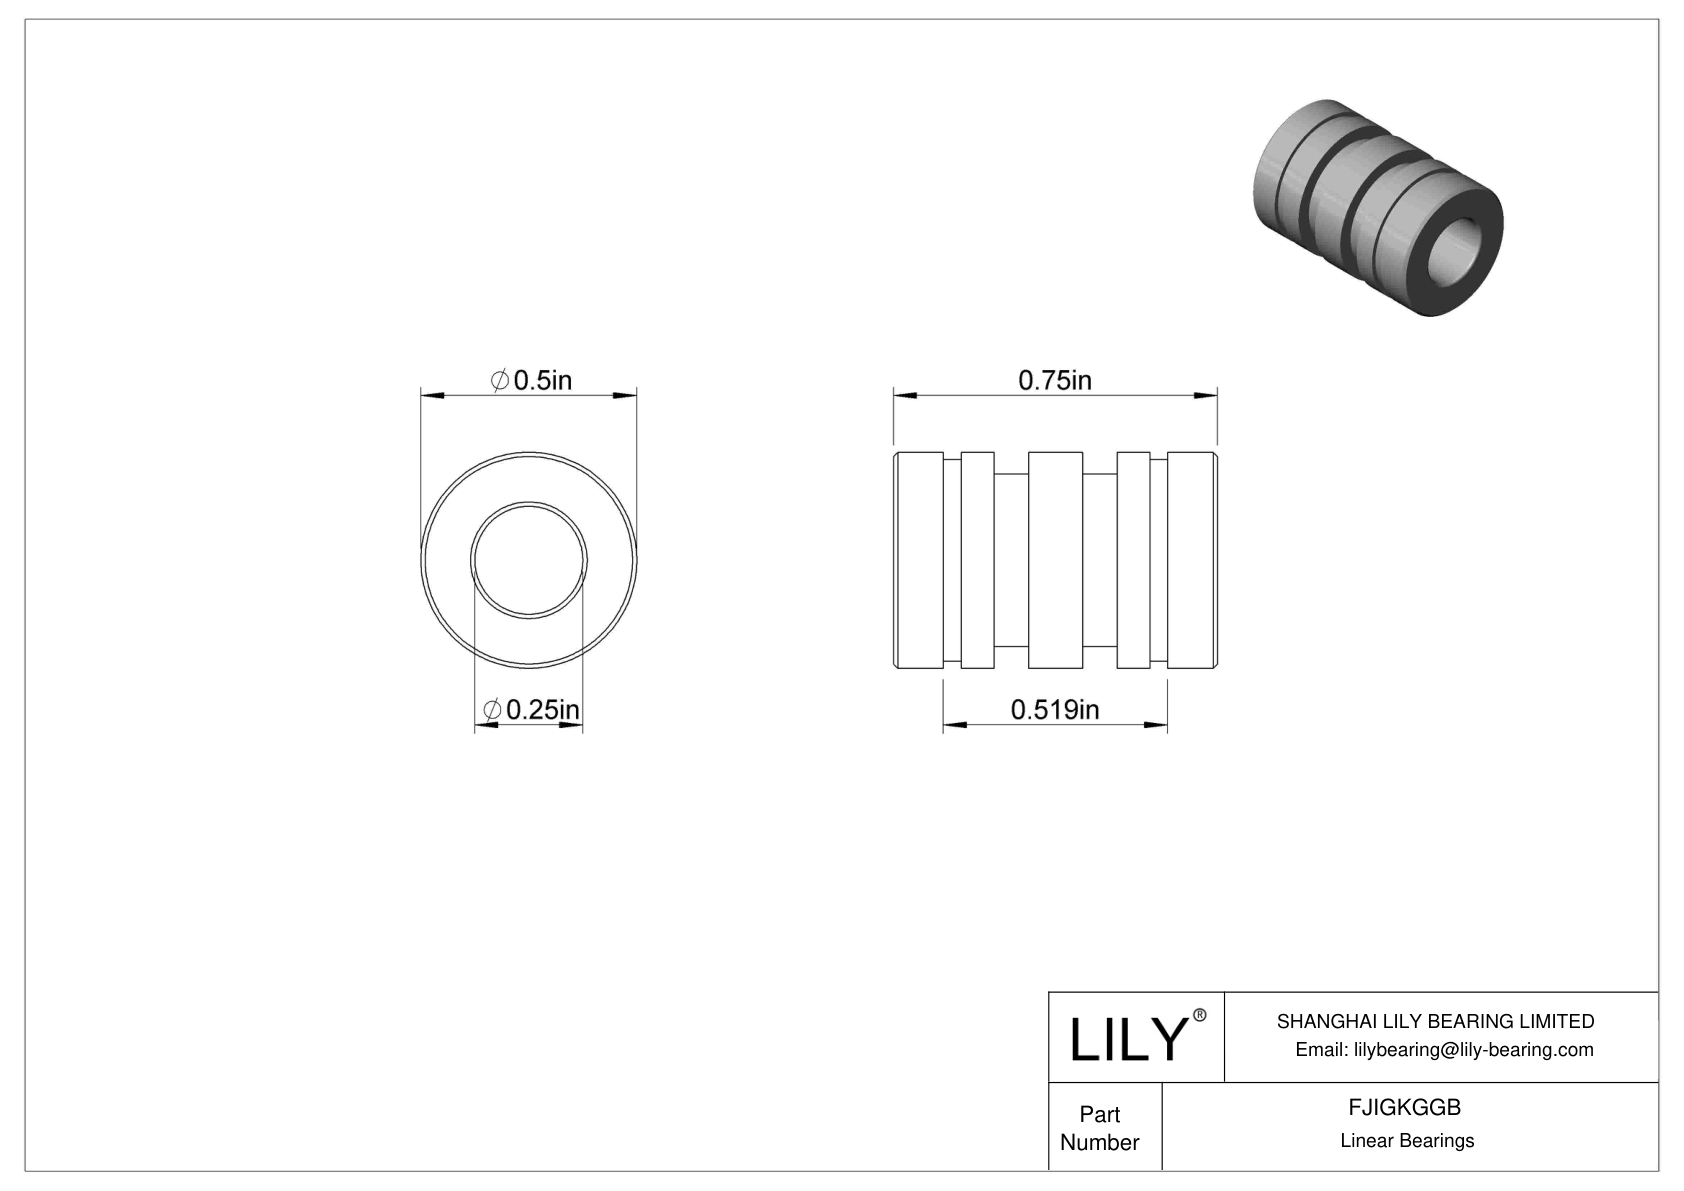 FJIGKGGB Common Linear Sleeve Bearings cad drawing